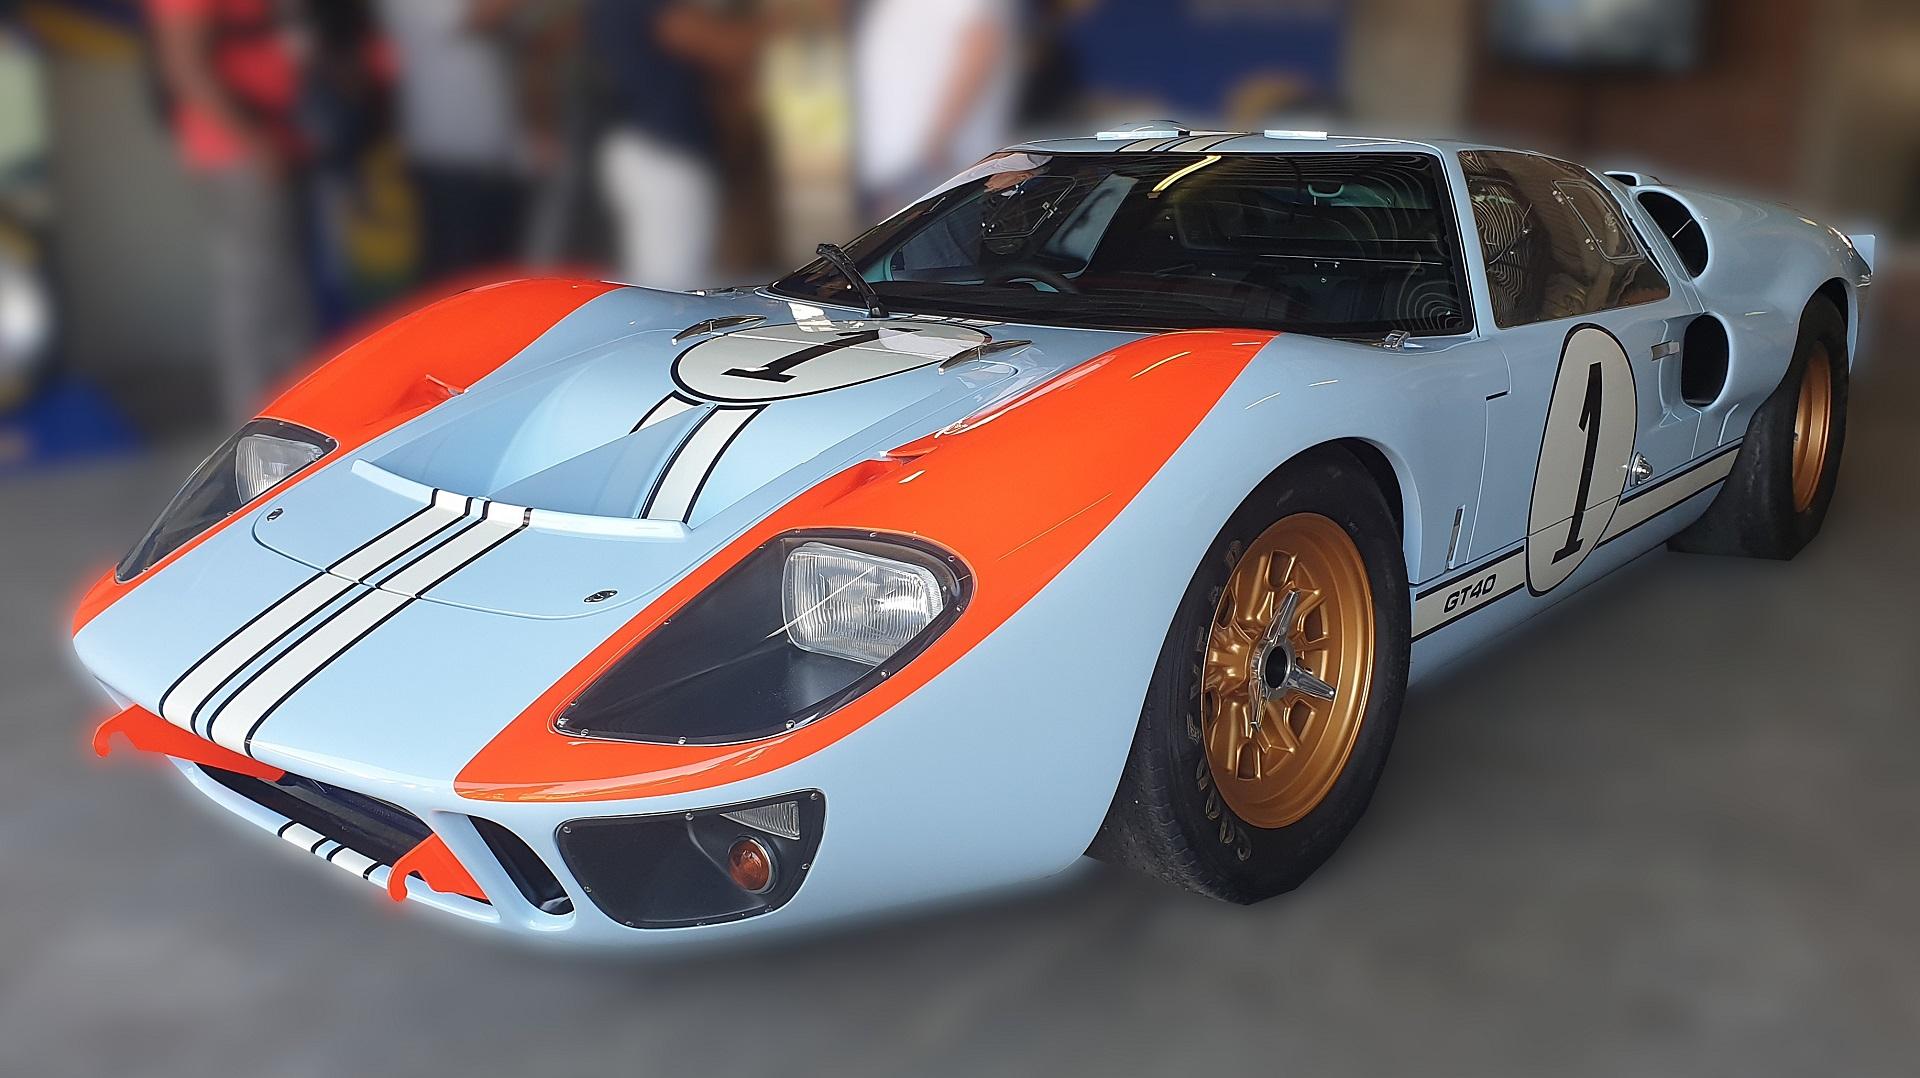 GT40 signed by Ford v Ferrari stars to be auctioned